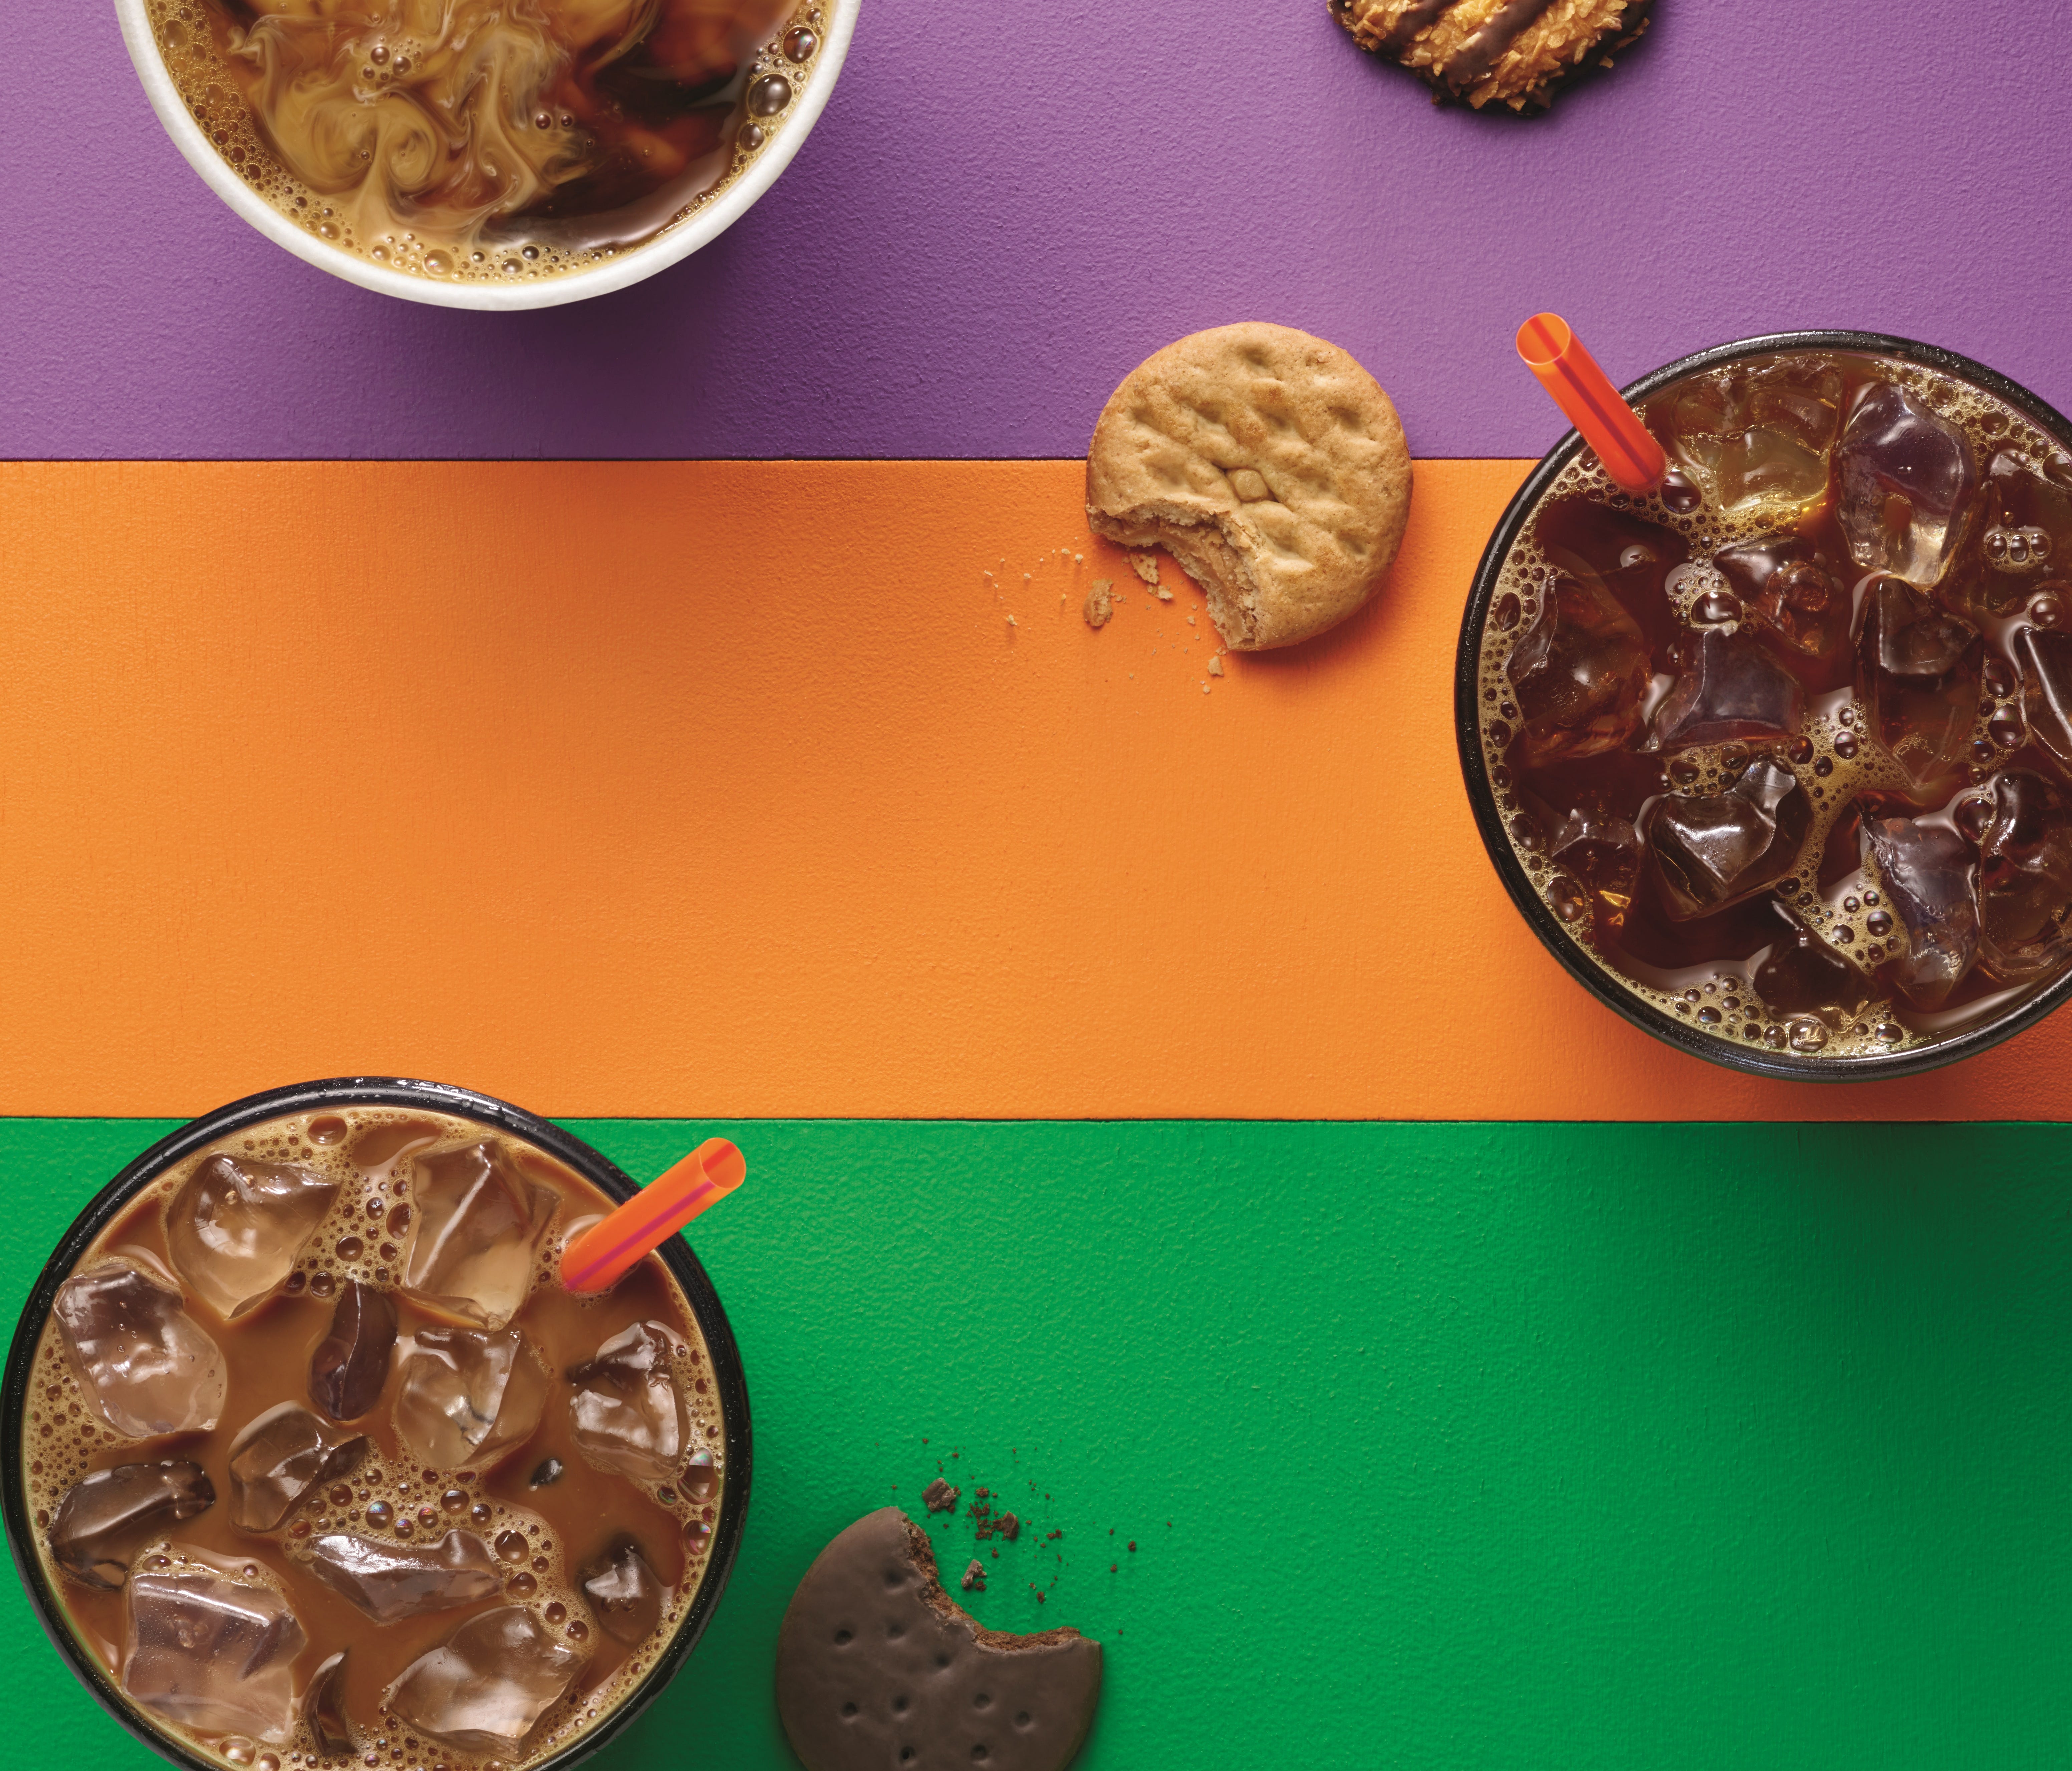 Dunkin' Donuts will start selling three new coffee flavors, inspired by Girl Scout cookies, on Monday.